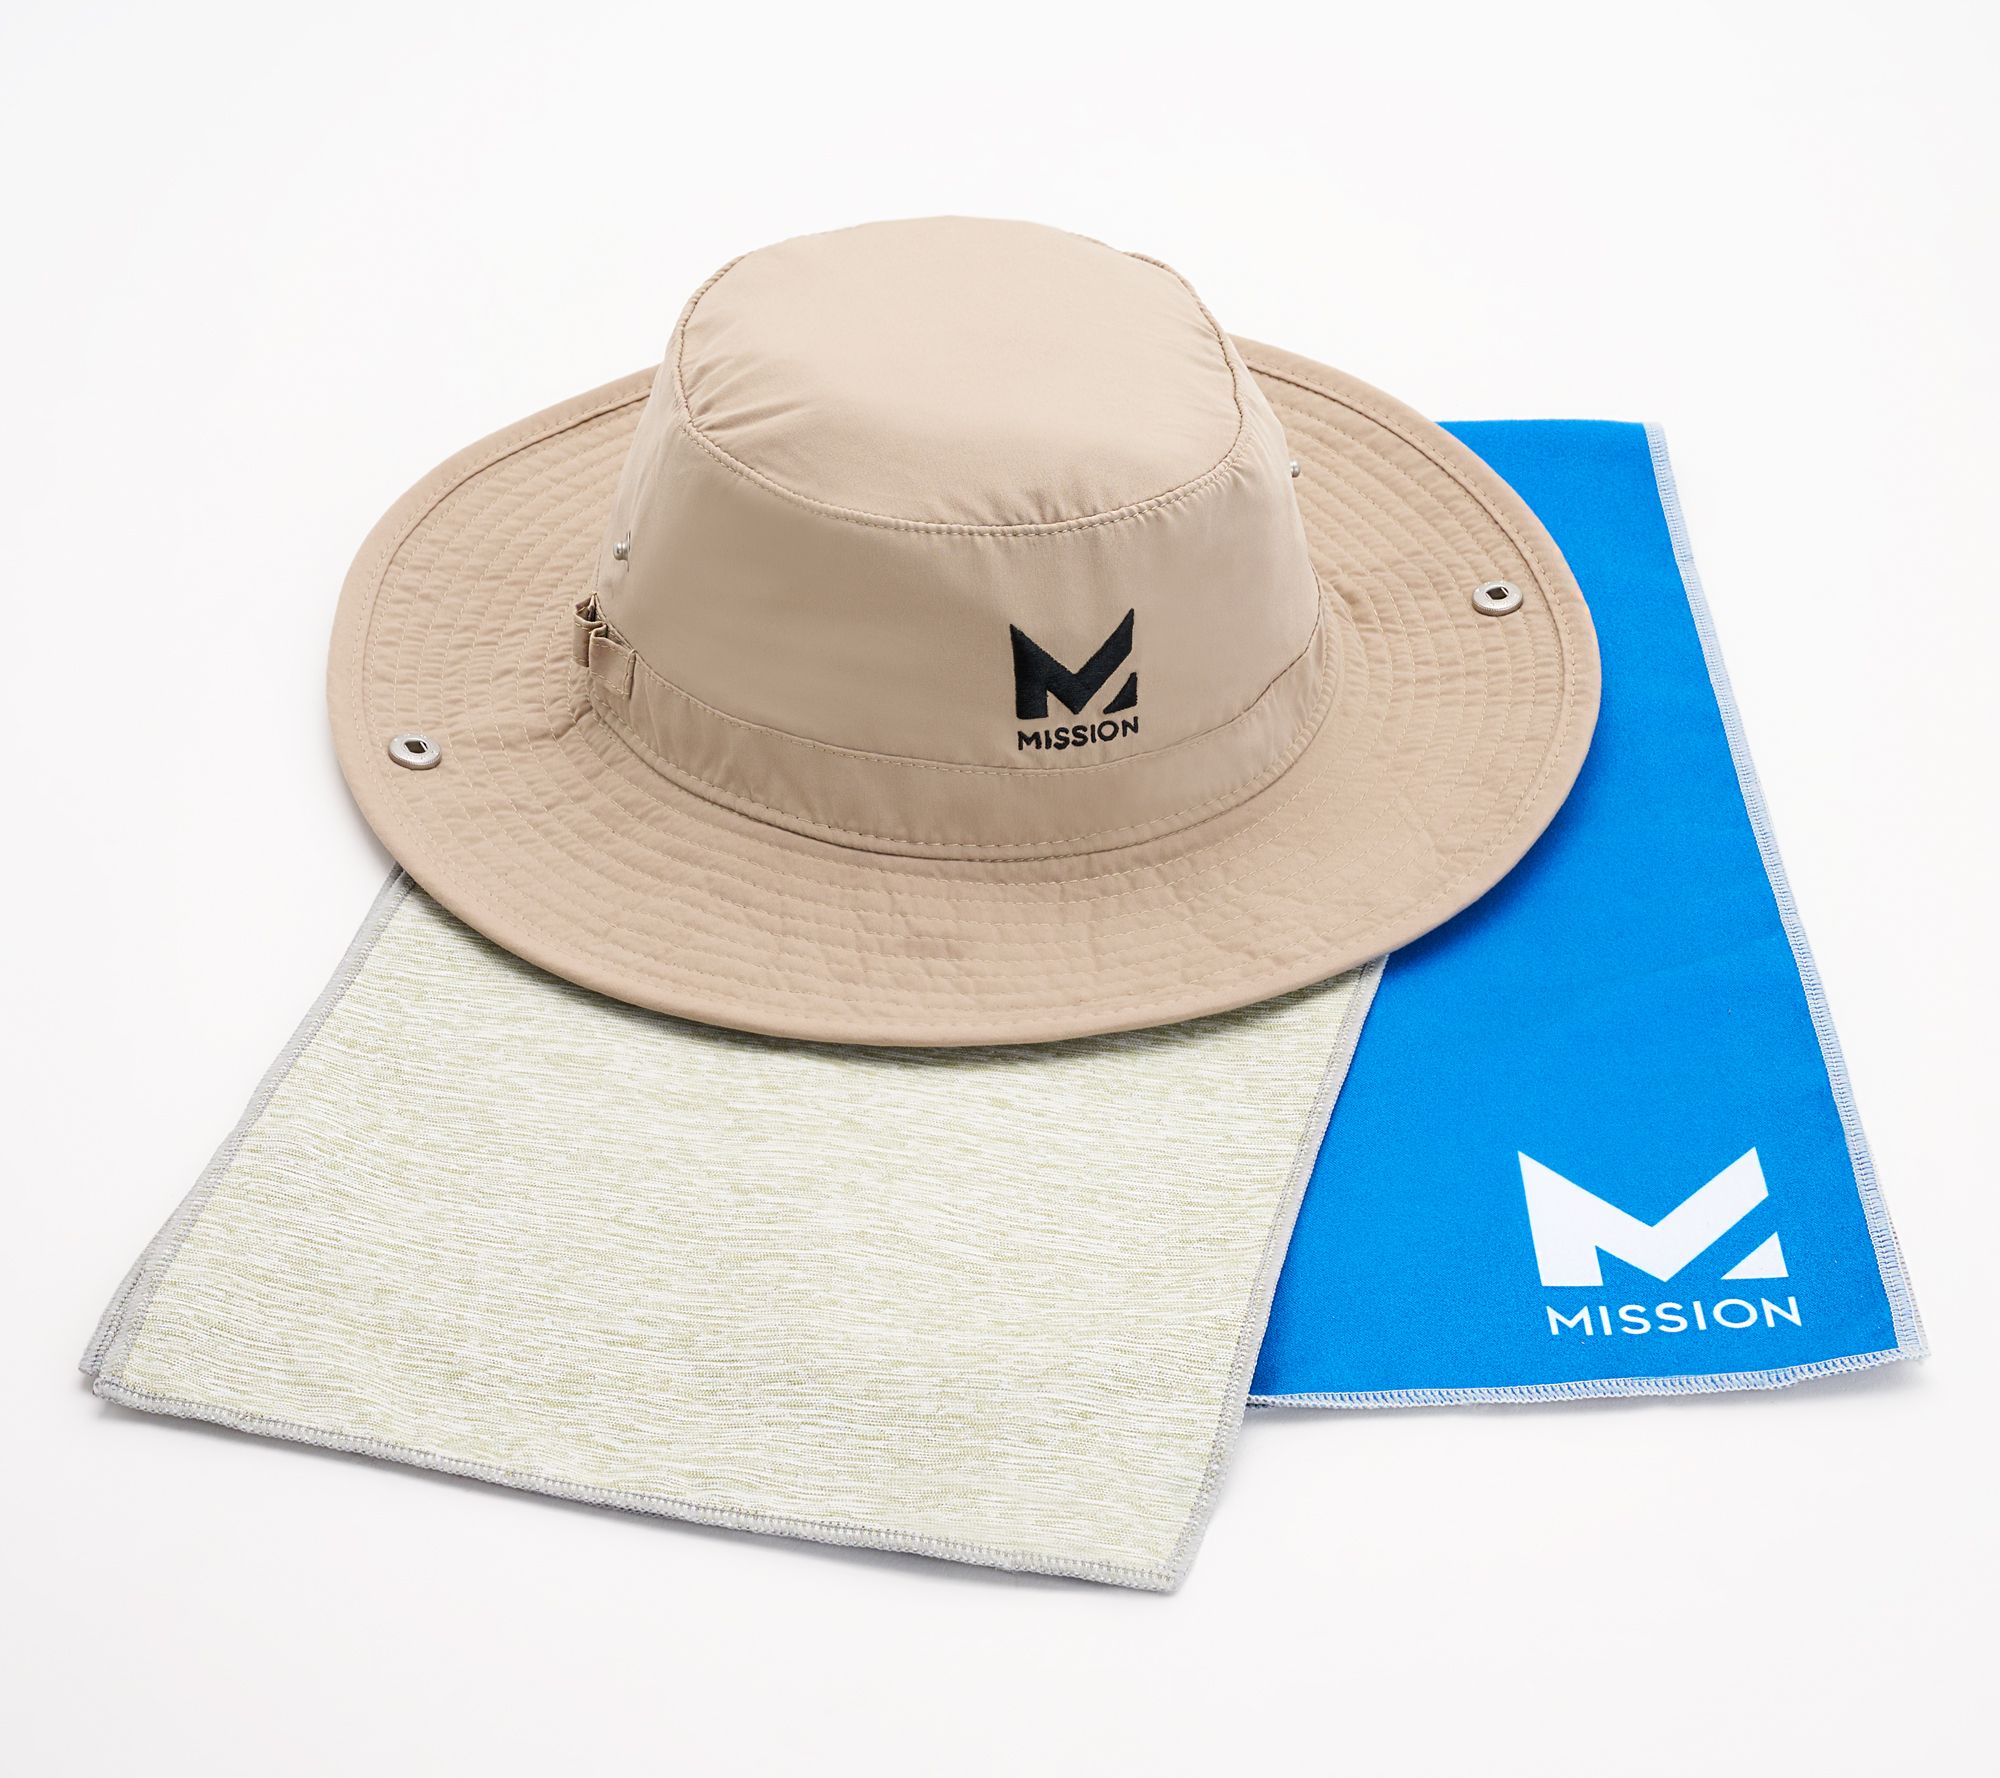 MISSION Cooling Bucket Hat- UPF 50, 3” Wide Brim, Cools When Wet